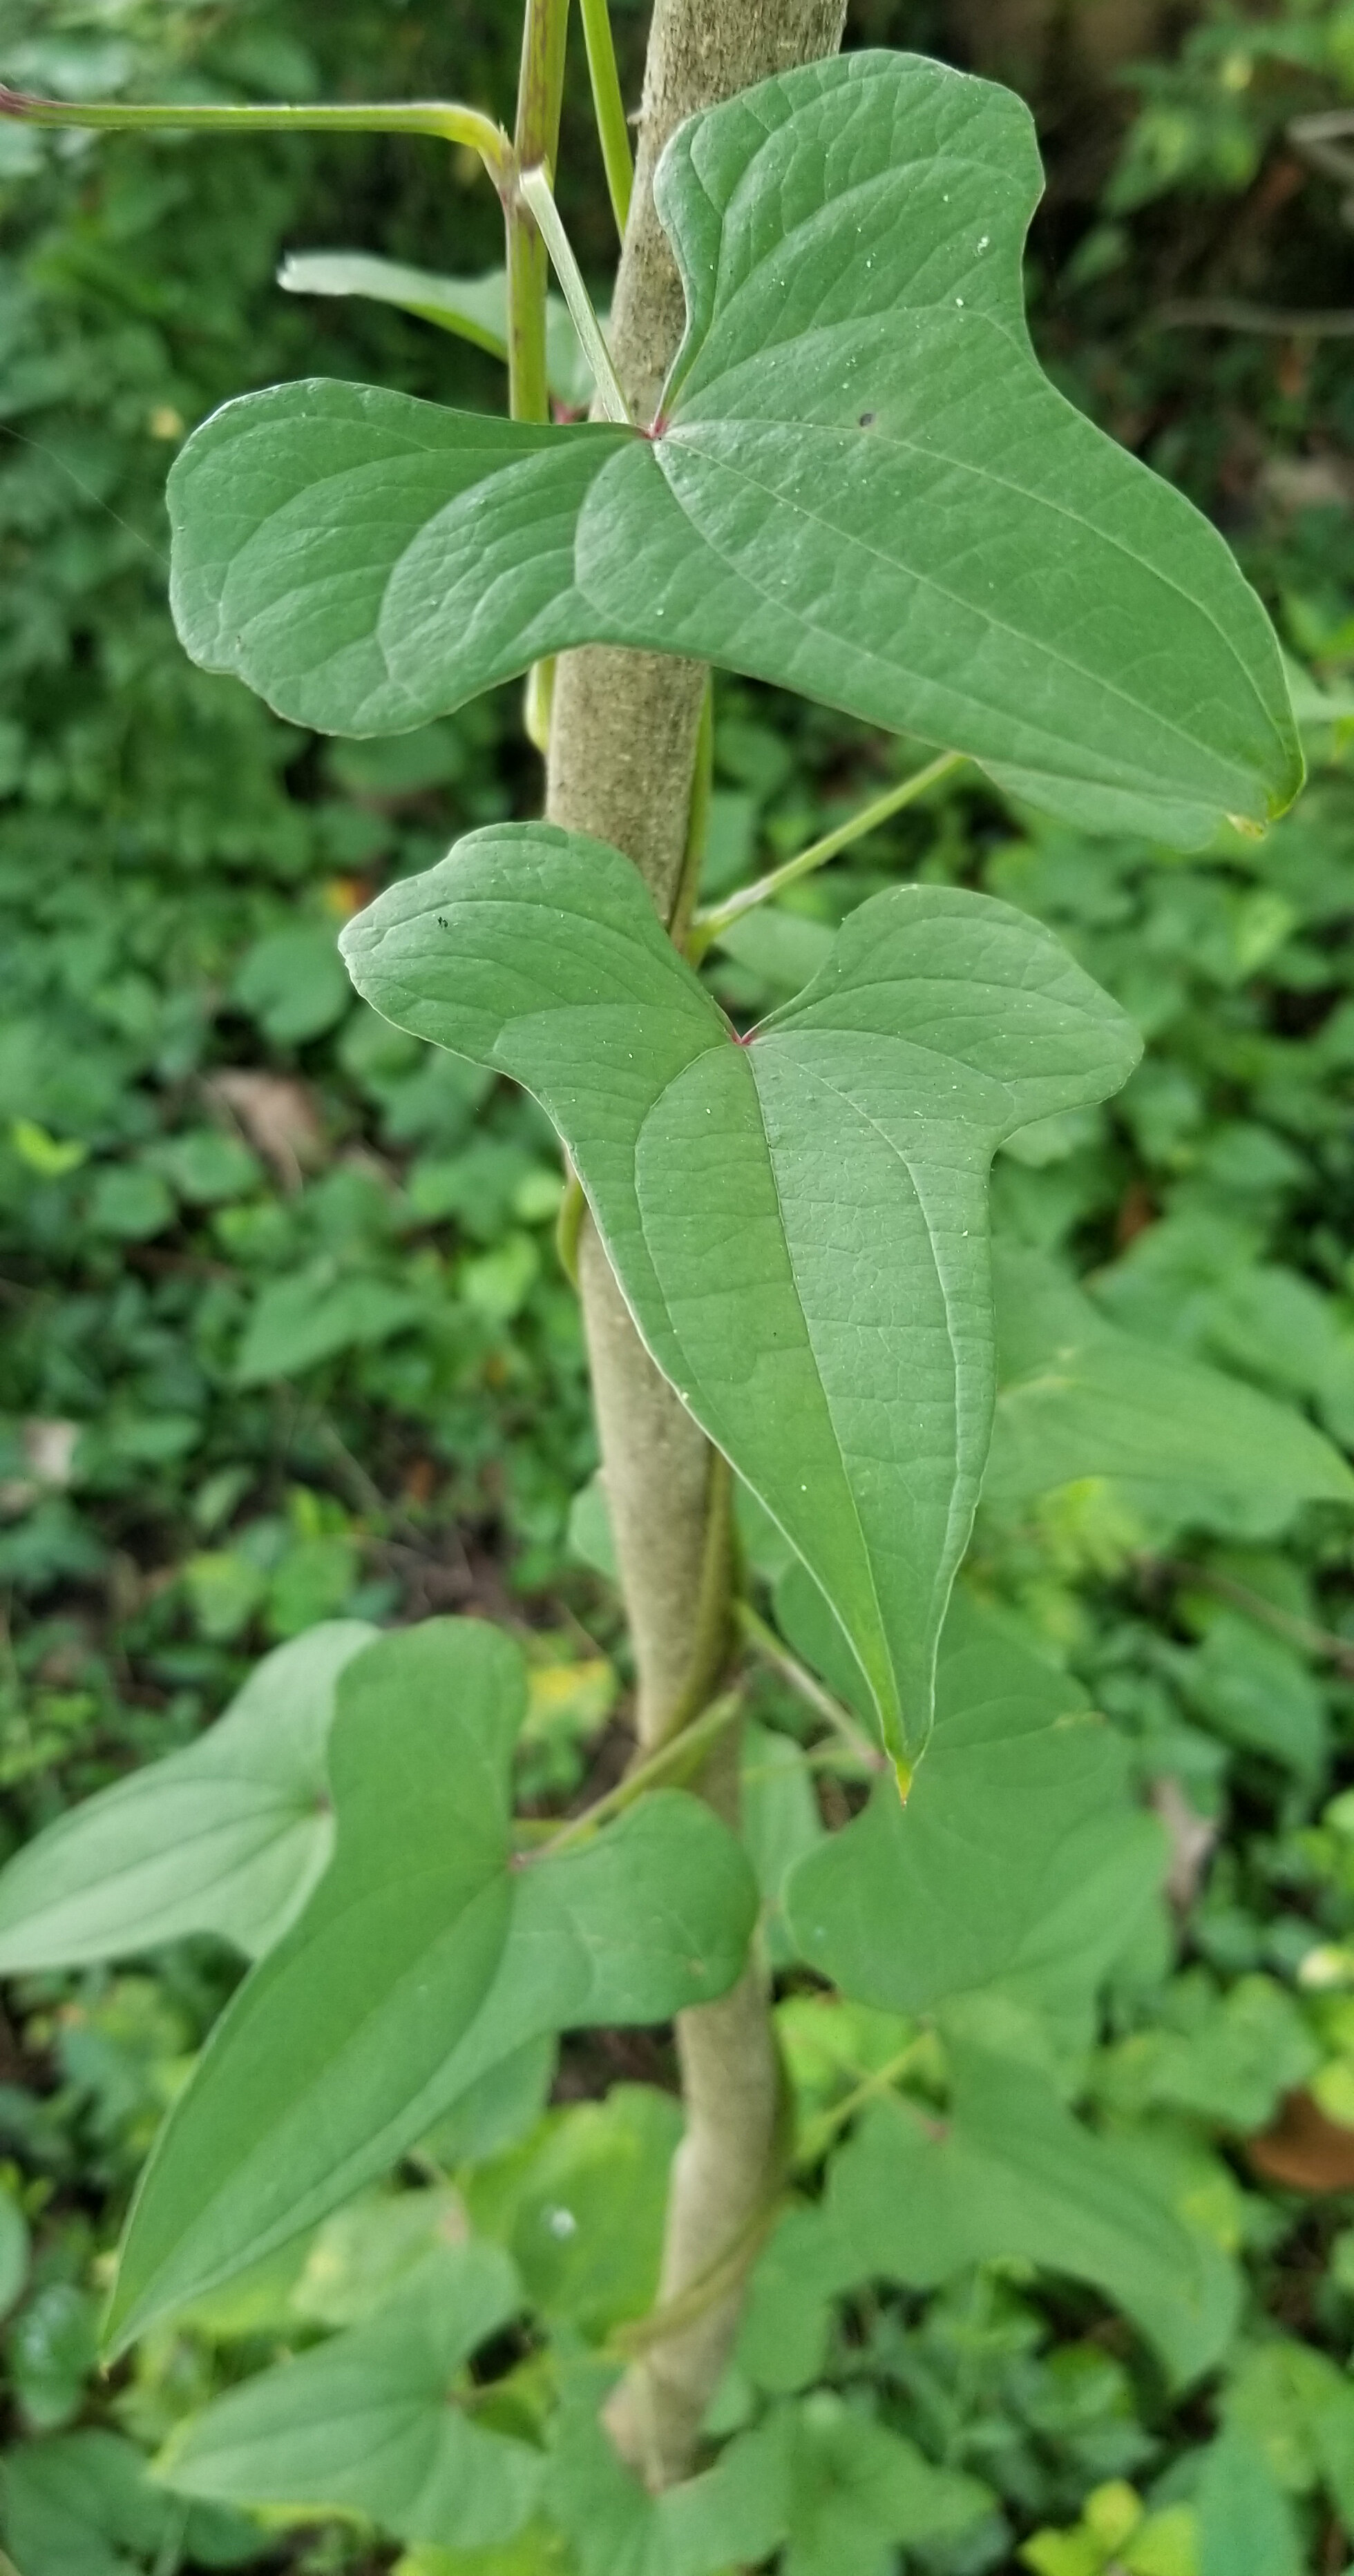 Chinese yam leaves